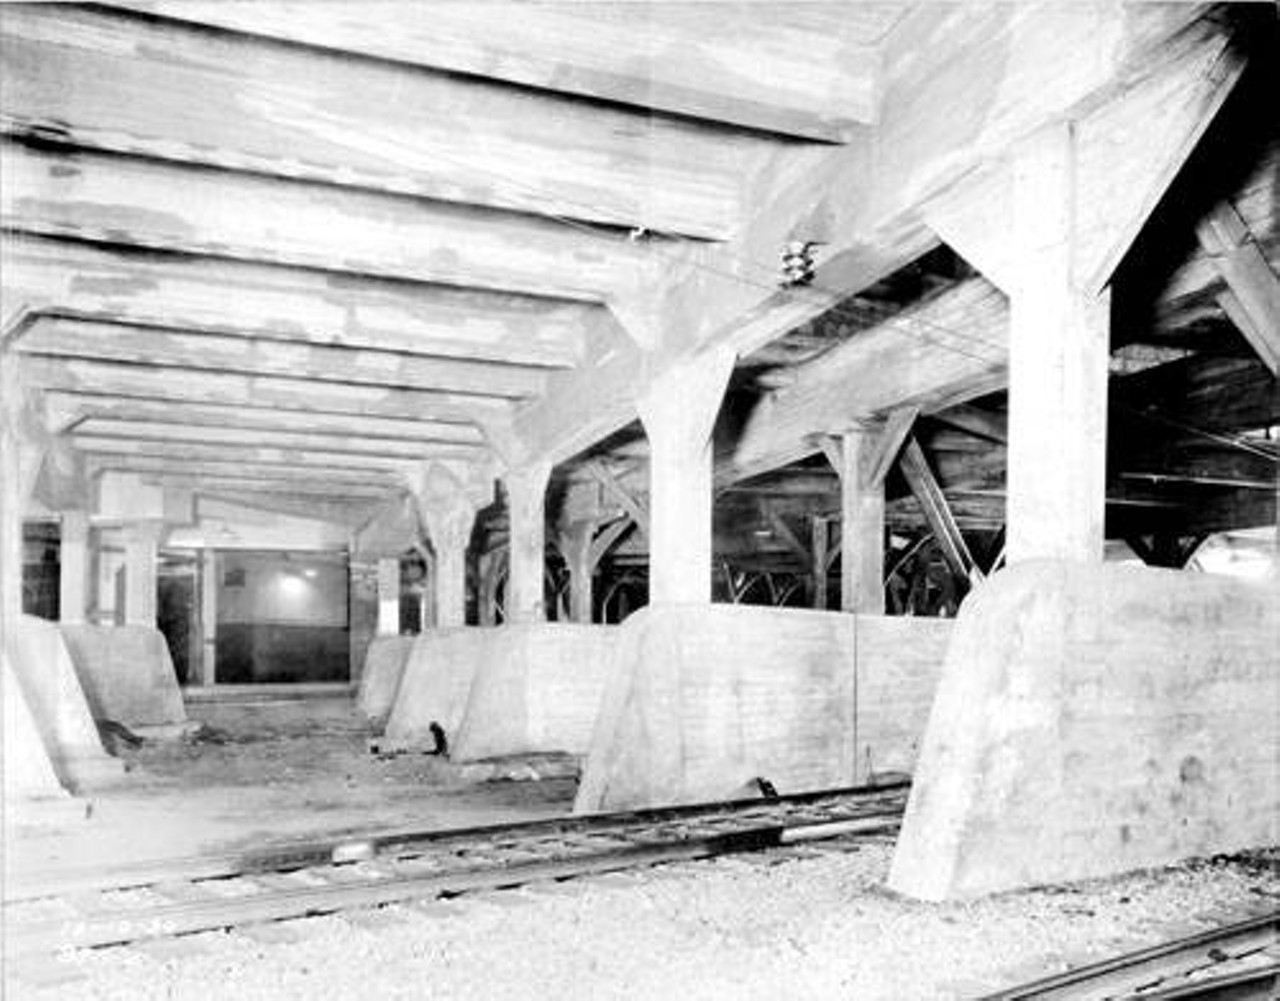 Higbees Building - Interior at ground level